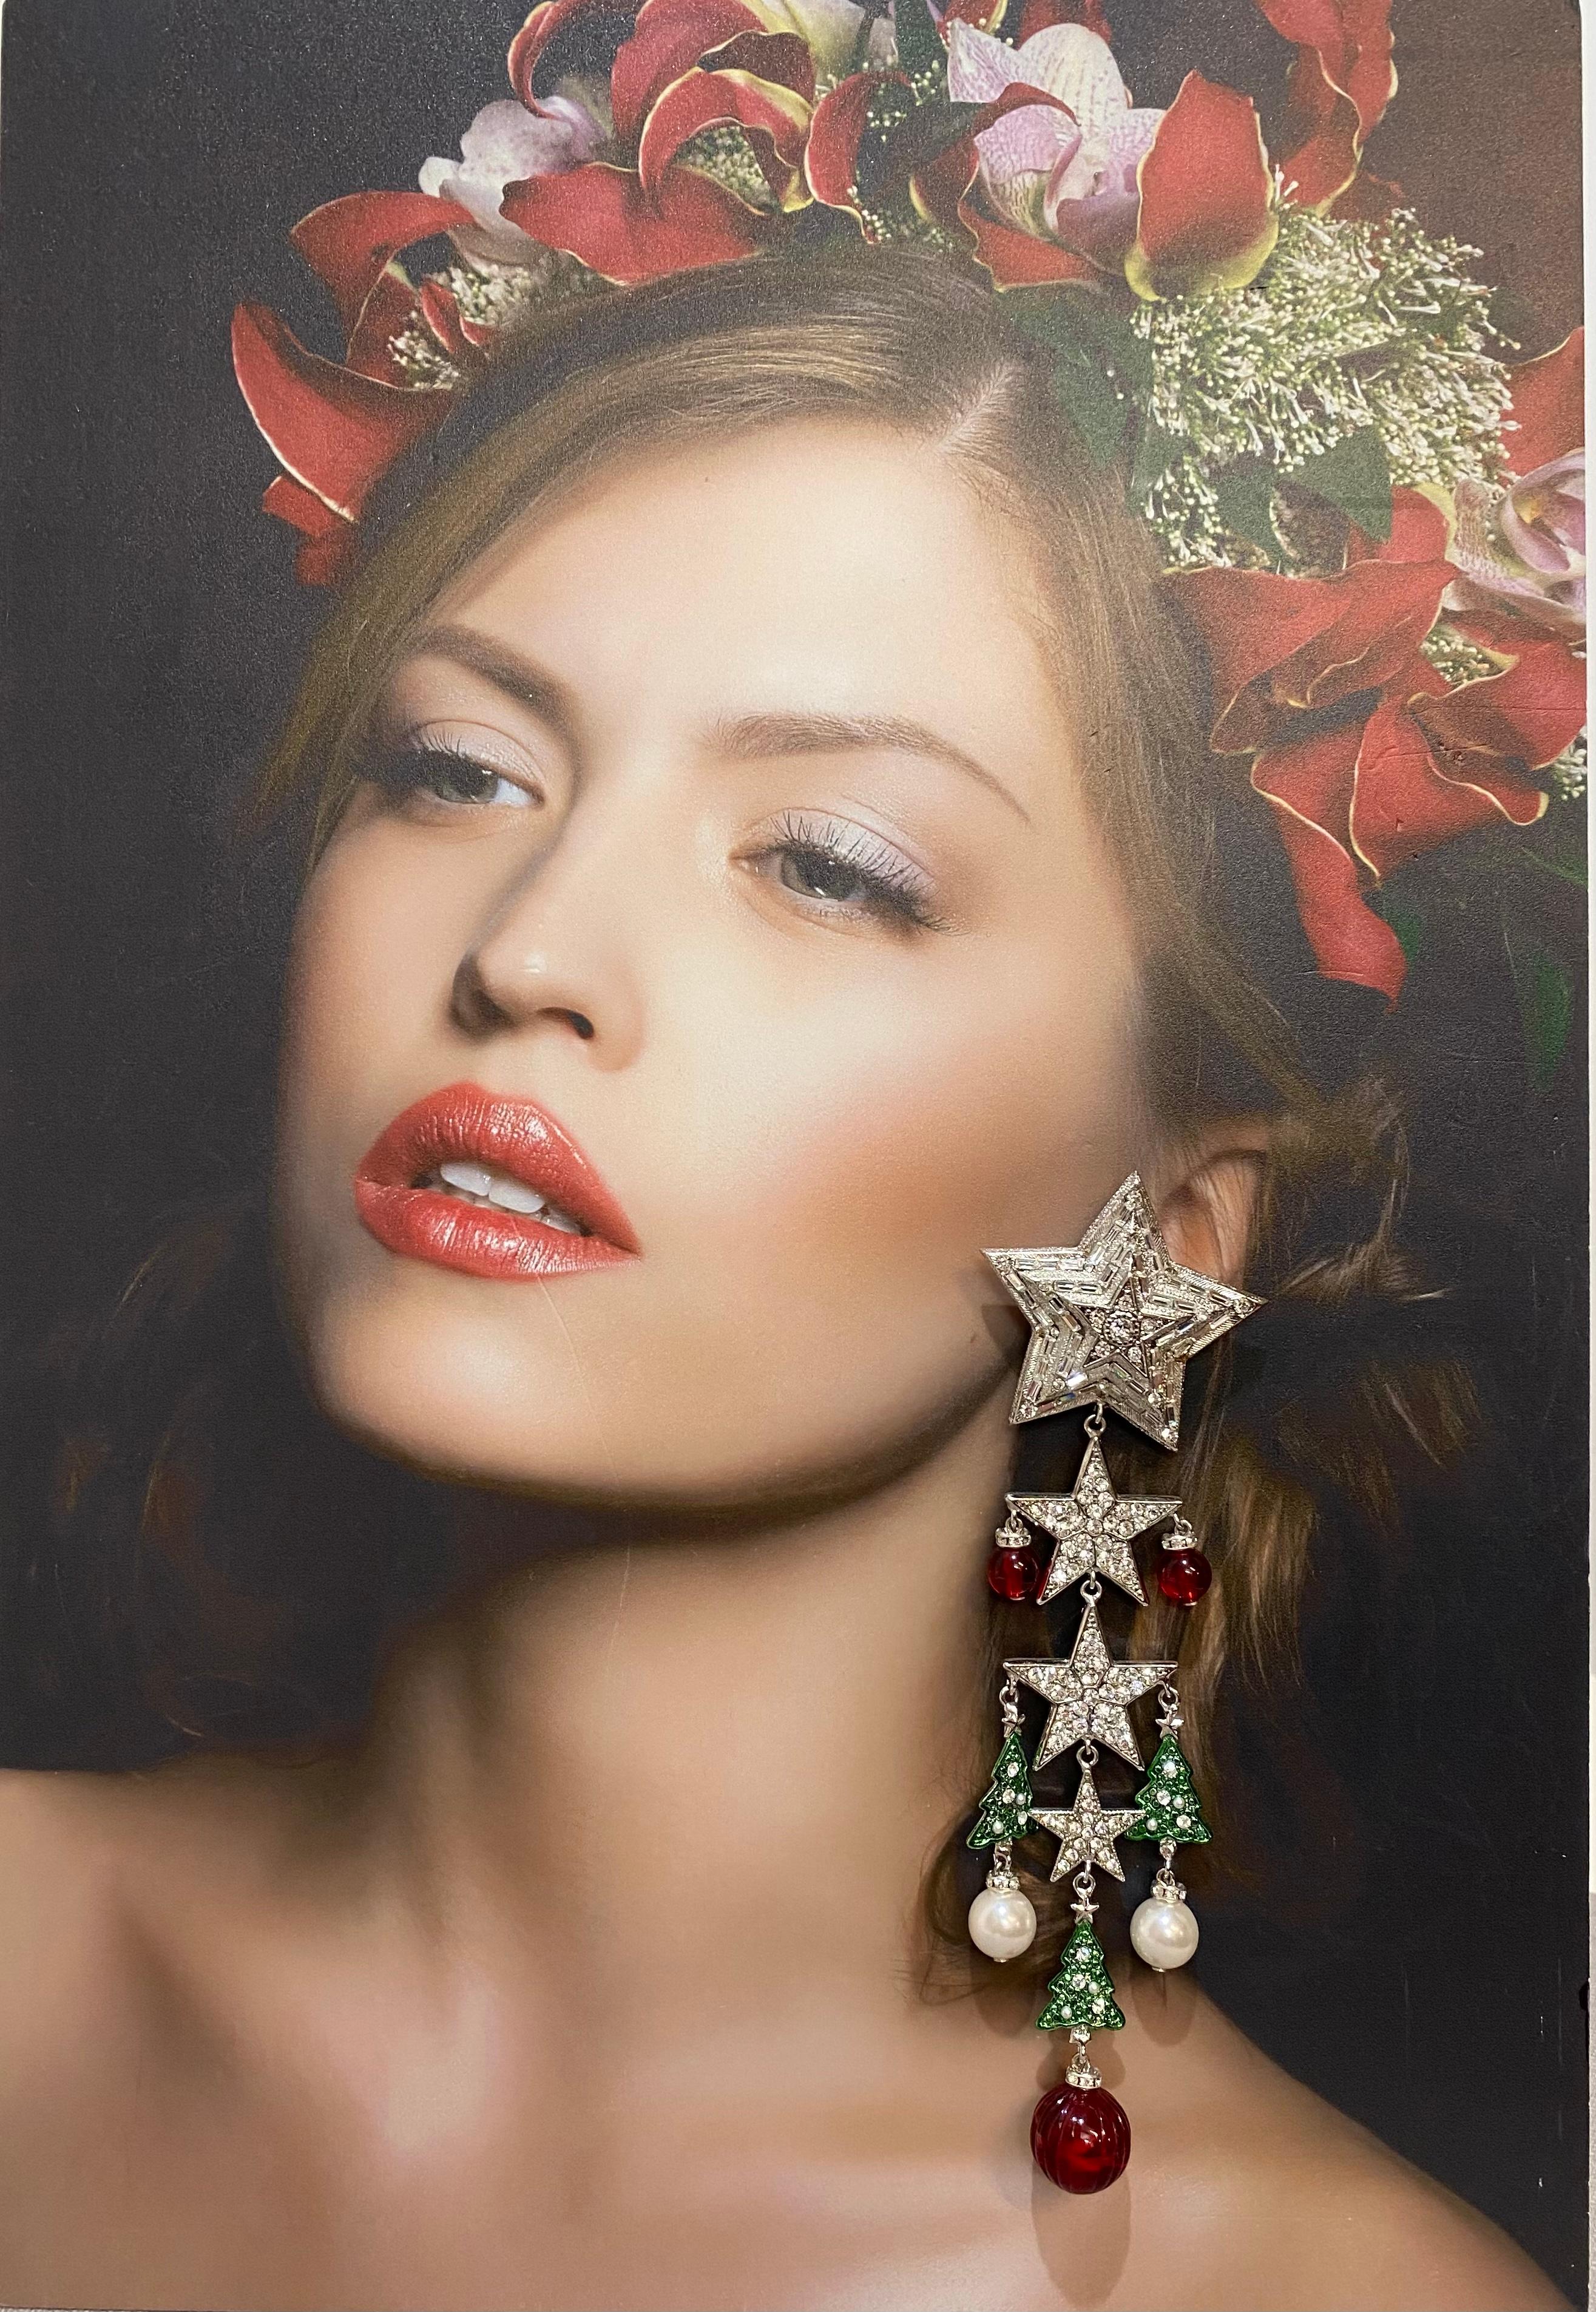 Amazing and funny Christmas earrings by Carlo Zini
One of the greatest world bijoux designer
Christmas theme
Non allergenic rhodium
Cm 16,5 (6,49 inches)
Amazing hand creation of class A Swarovski crystals colored resins
Clip on closure, pierced on